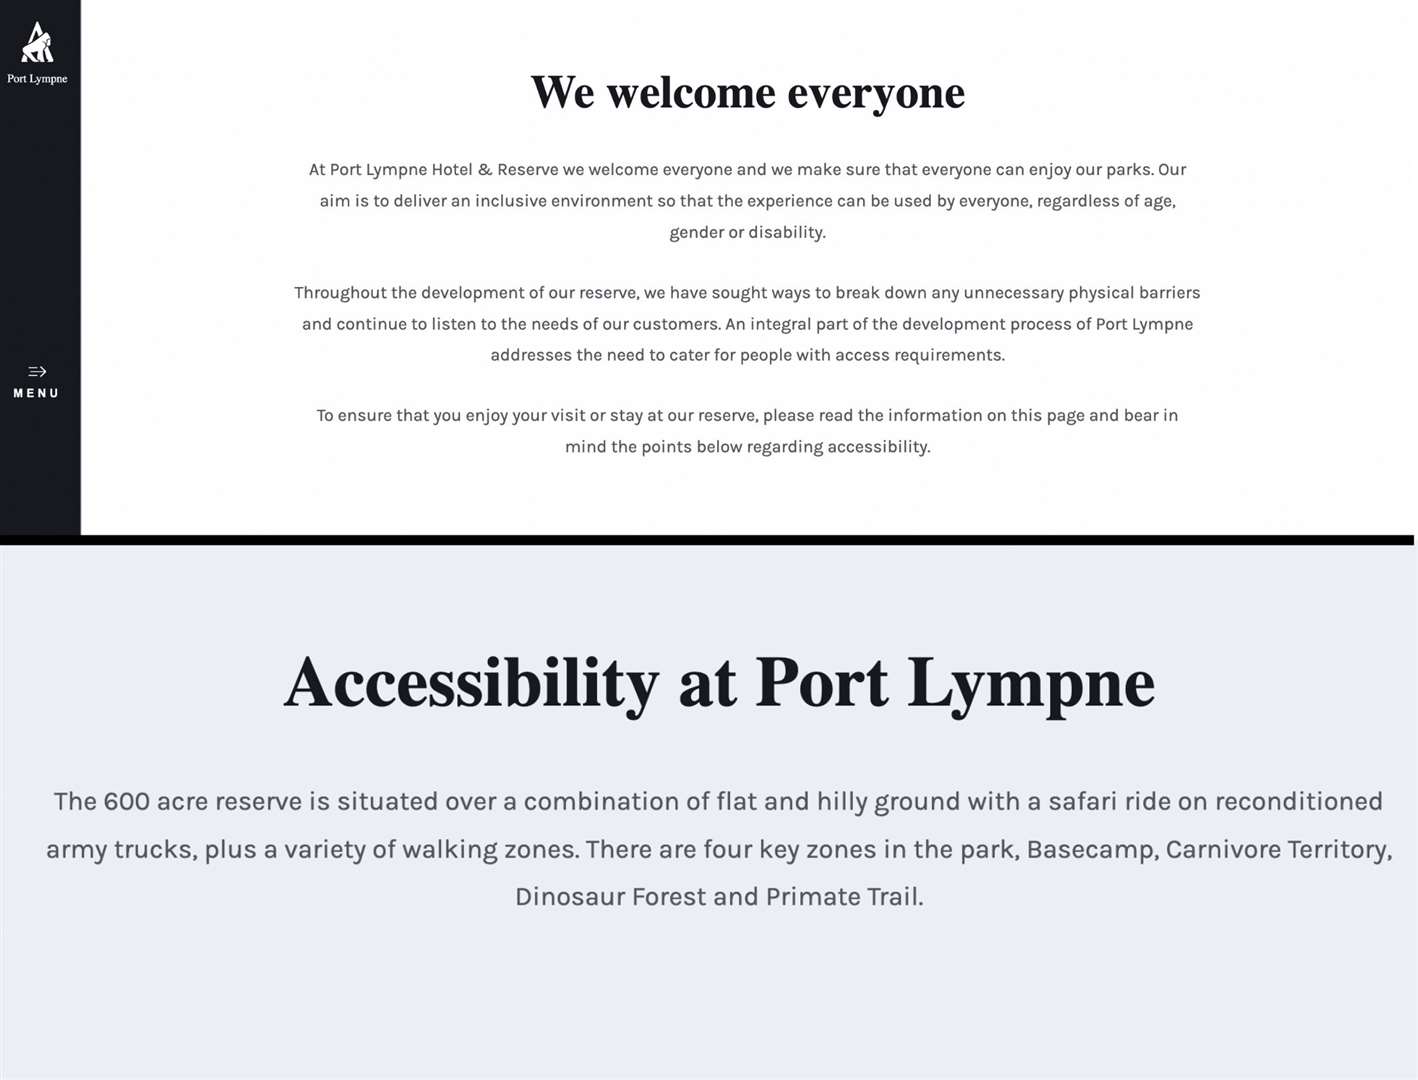 Accessibility statements on the Port Lympne website (62583502)